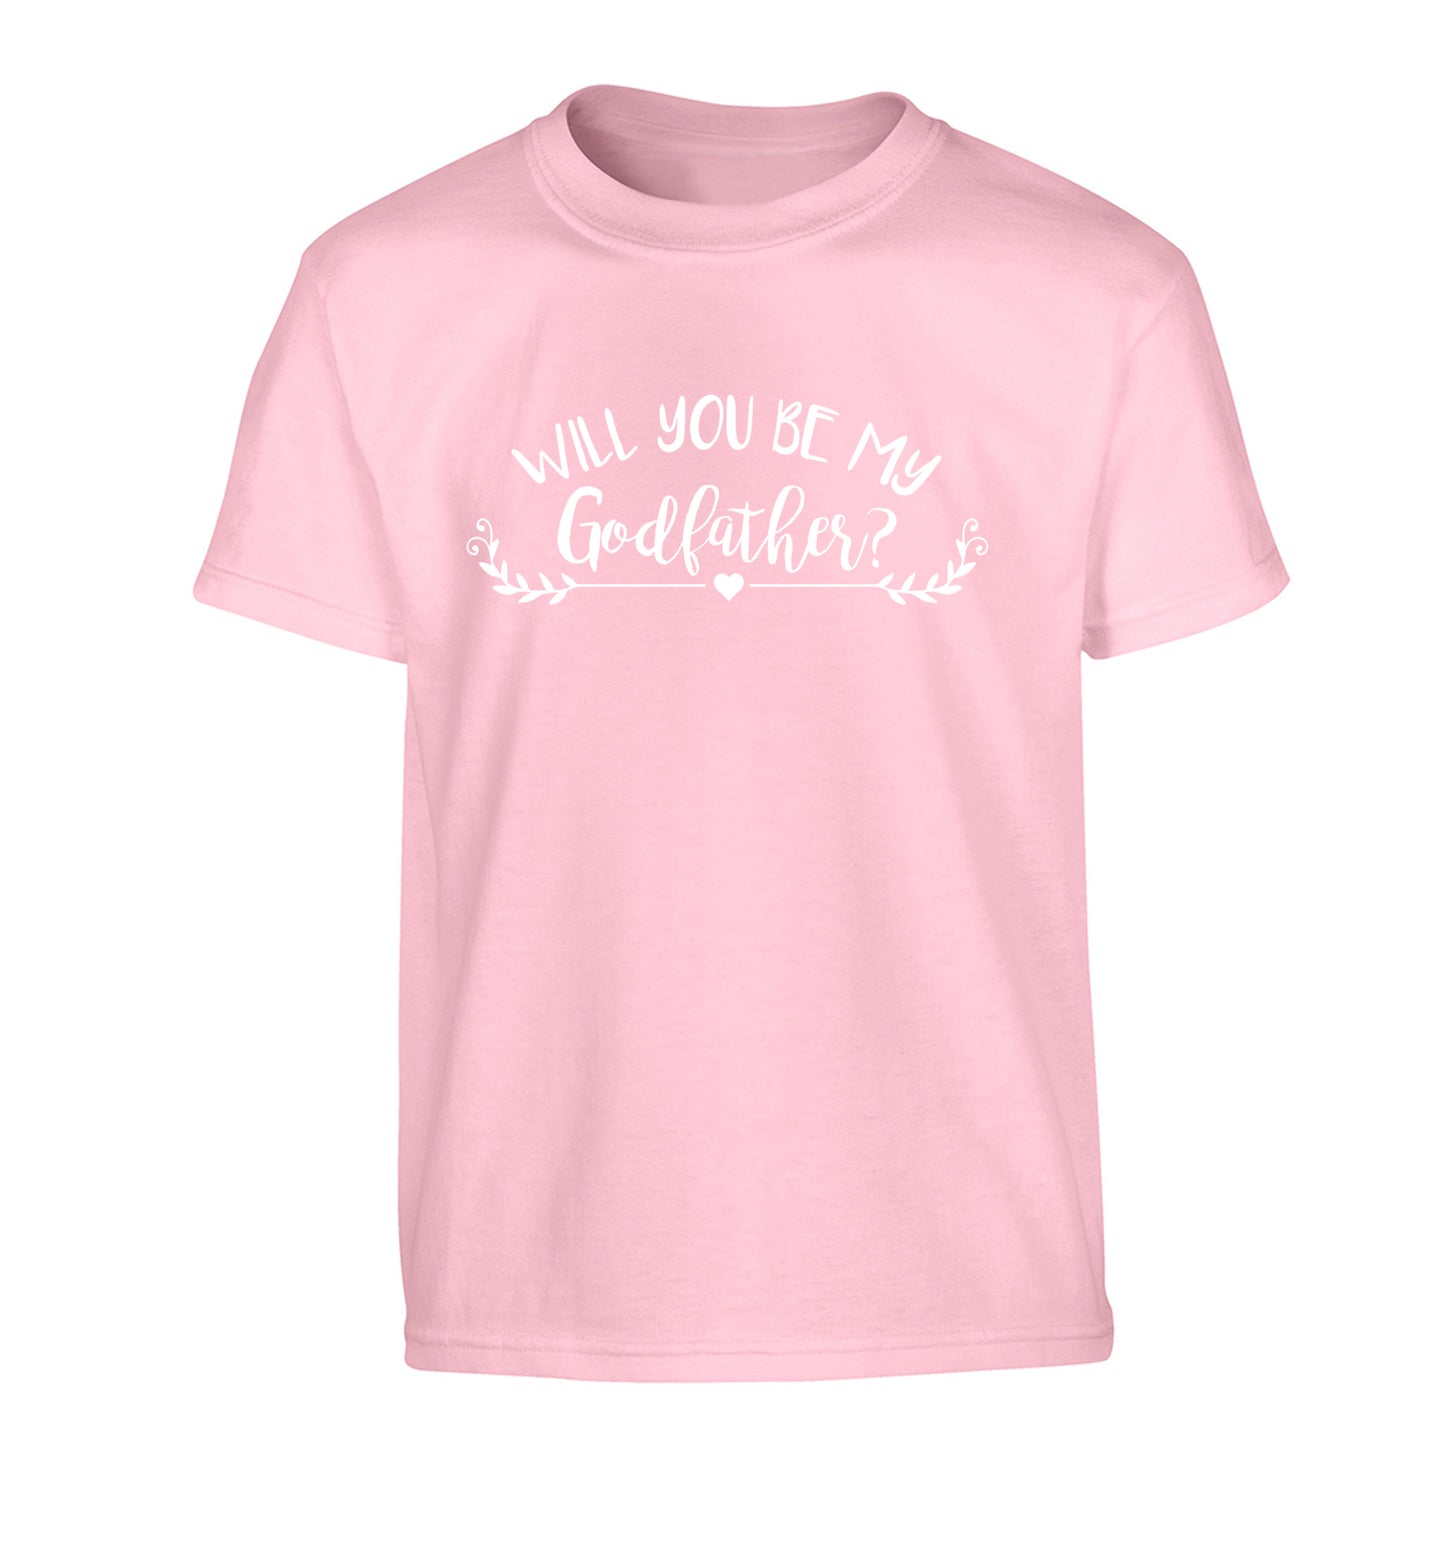 Will you be my godfather? Children's light pink Tshirt 12-14 Years